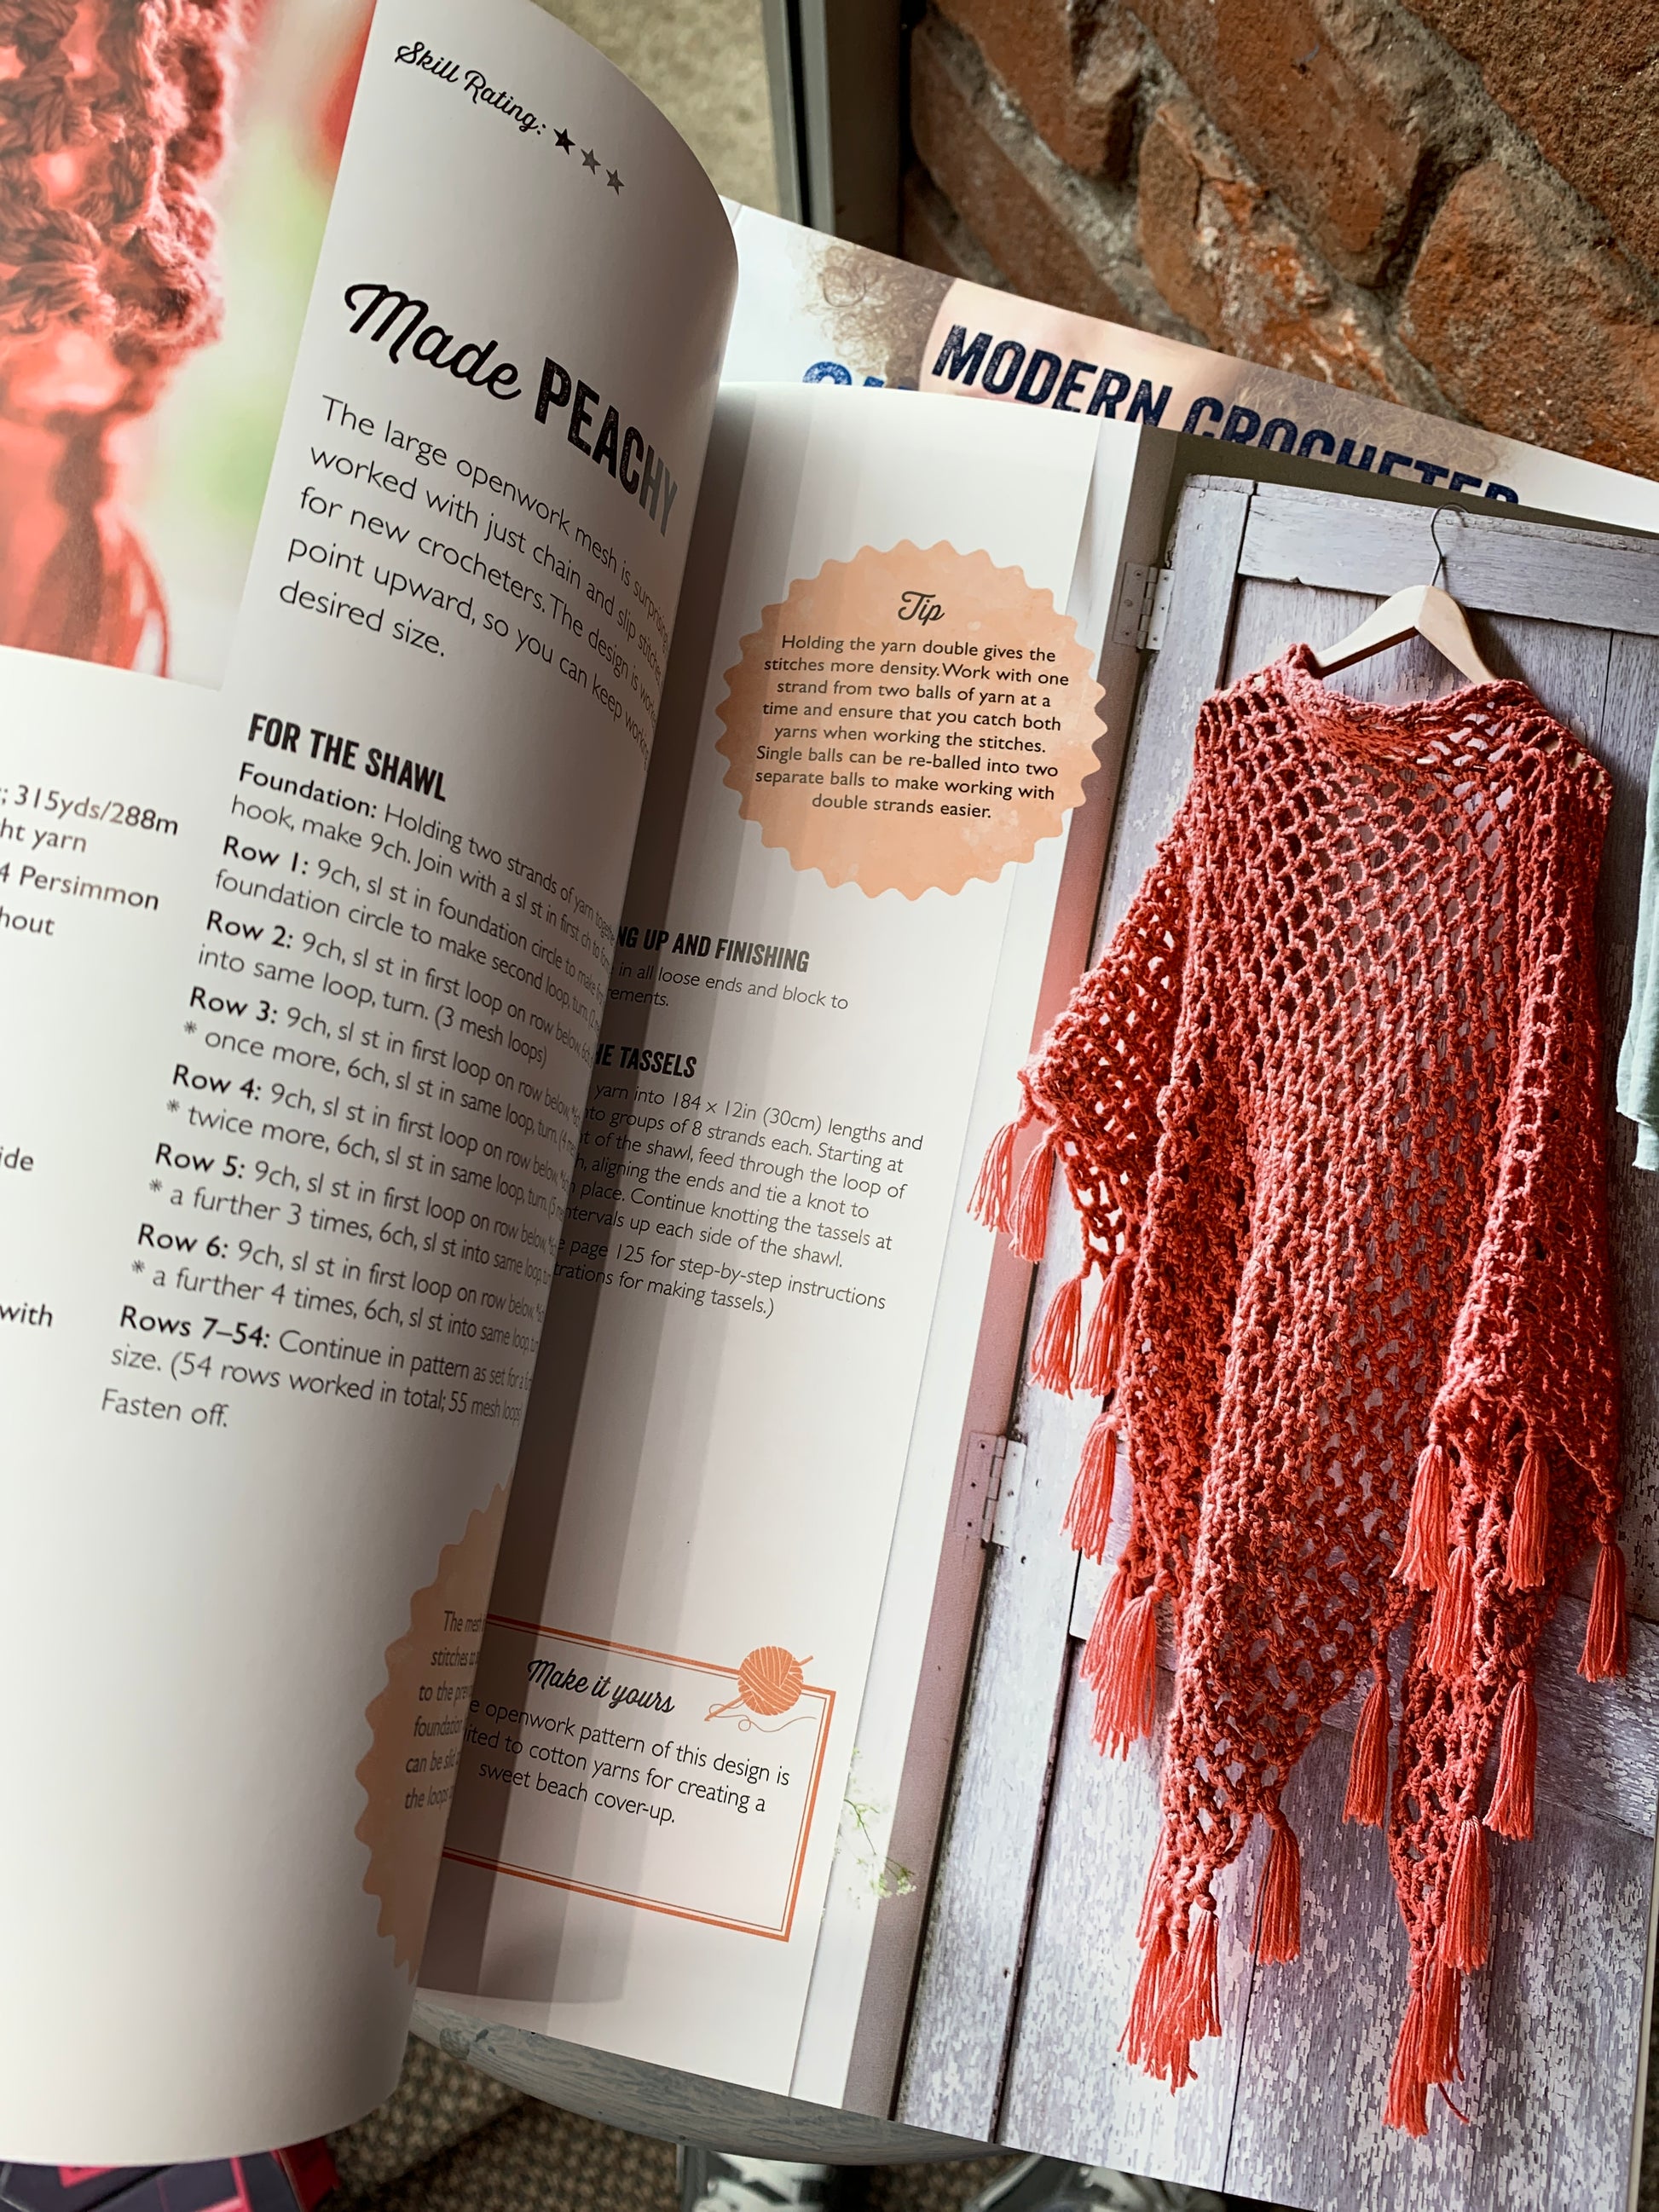 Modern Crocheted Shawls and Wraps has 35 patterns ranging from a simple, slip-on crochet wrap, to a large open-work shawl with tassels, and an emerald-green afghan with contrasting borders. There are lace-patterned shawls to drape around your shoulders at a party, or capelets to add a layer of warmth to your outfit on chilly days. Granny hexagons and stars are used to make giant rectangular wraps and afghans, while triangle stitch and puff stitch add texture and weight.